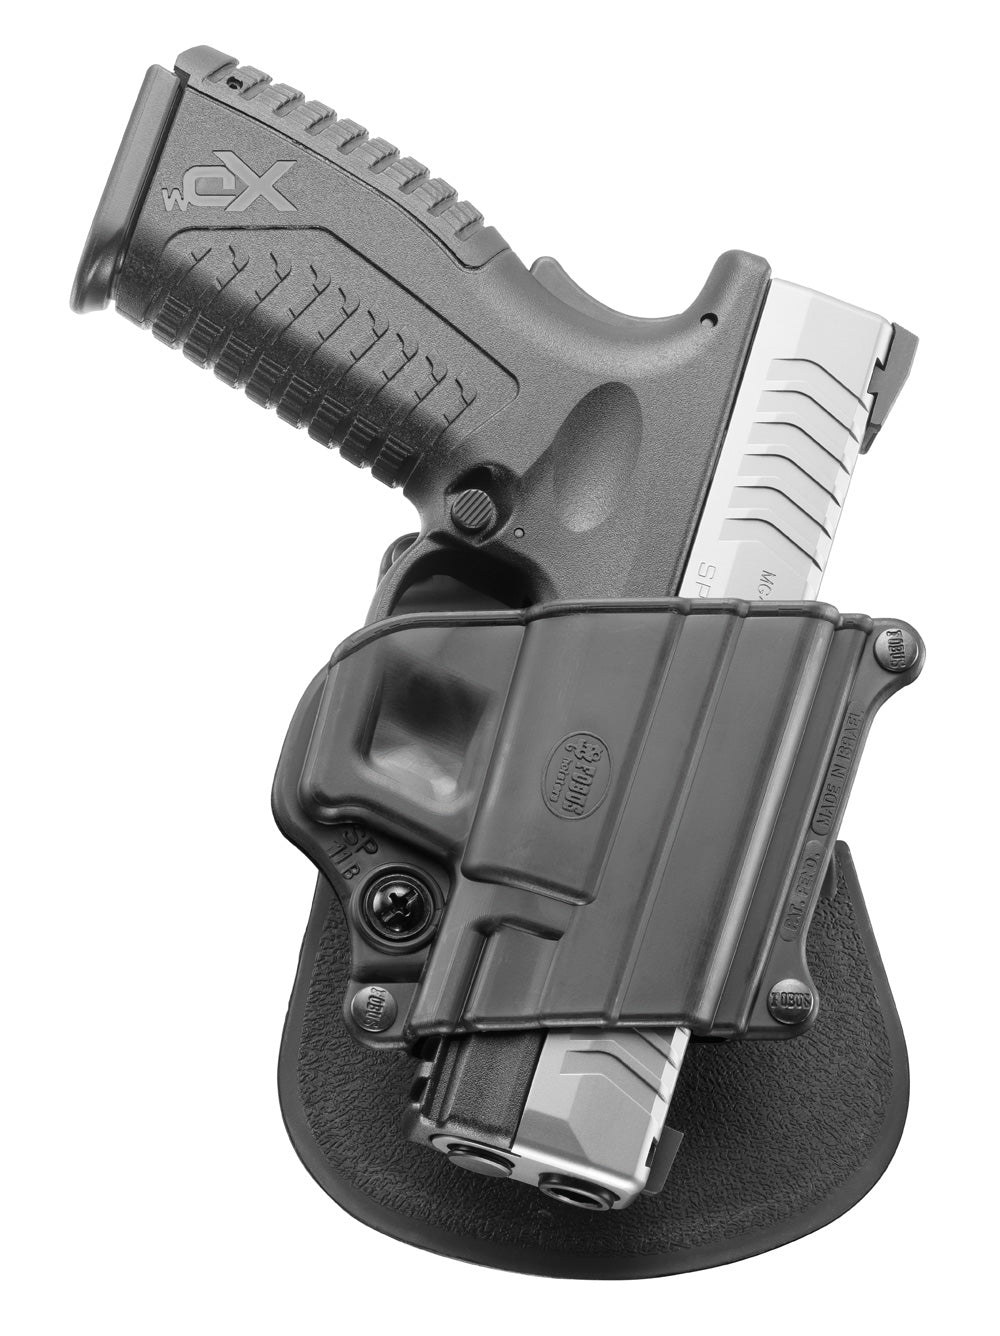 Fobus sp-11b paddle holster